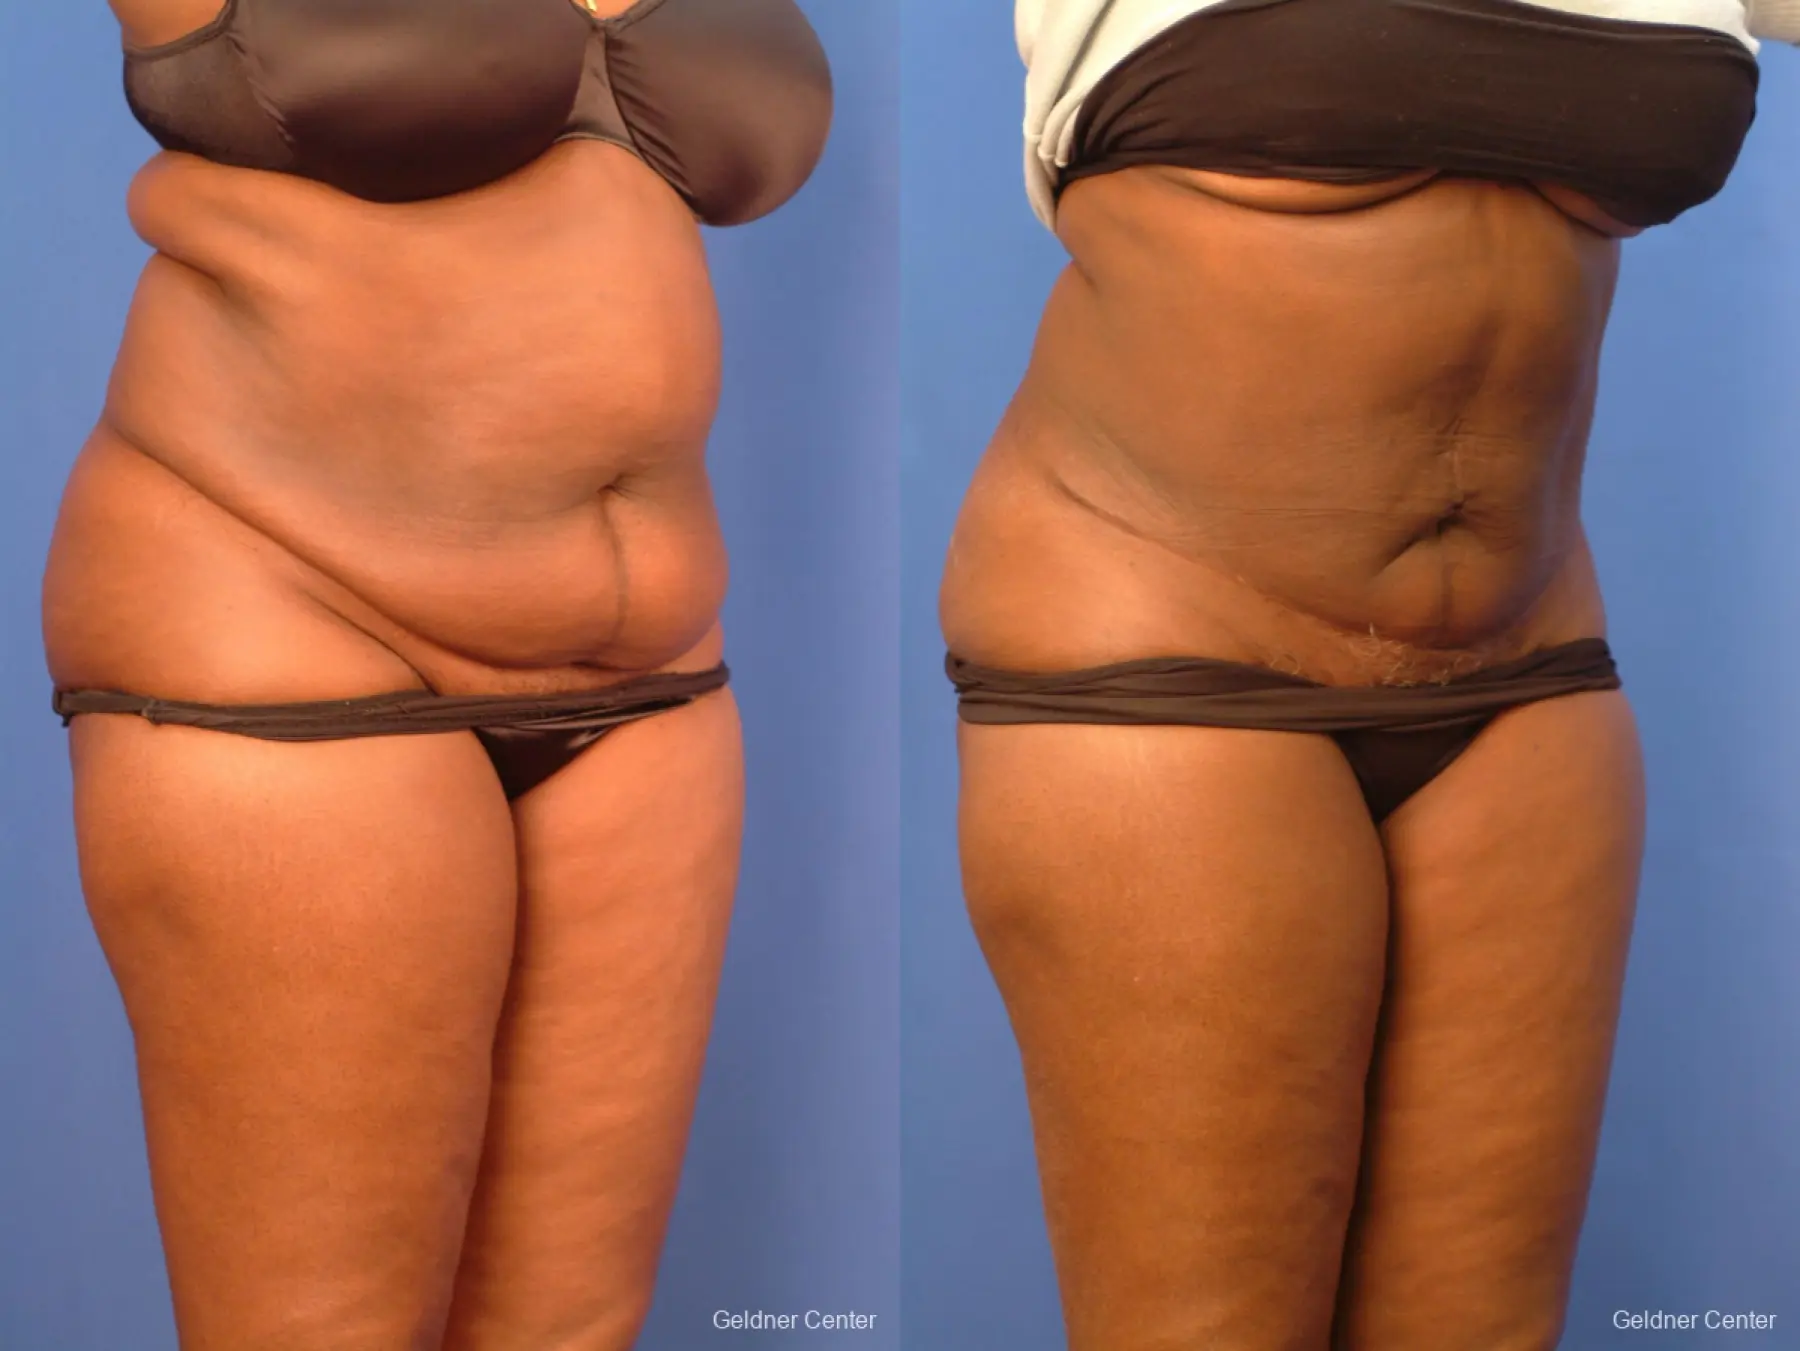 Vaser lipo patient 2540 before and after photos - Before and After 3